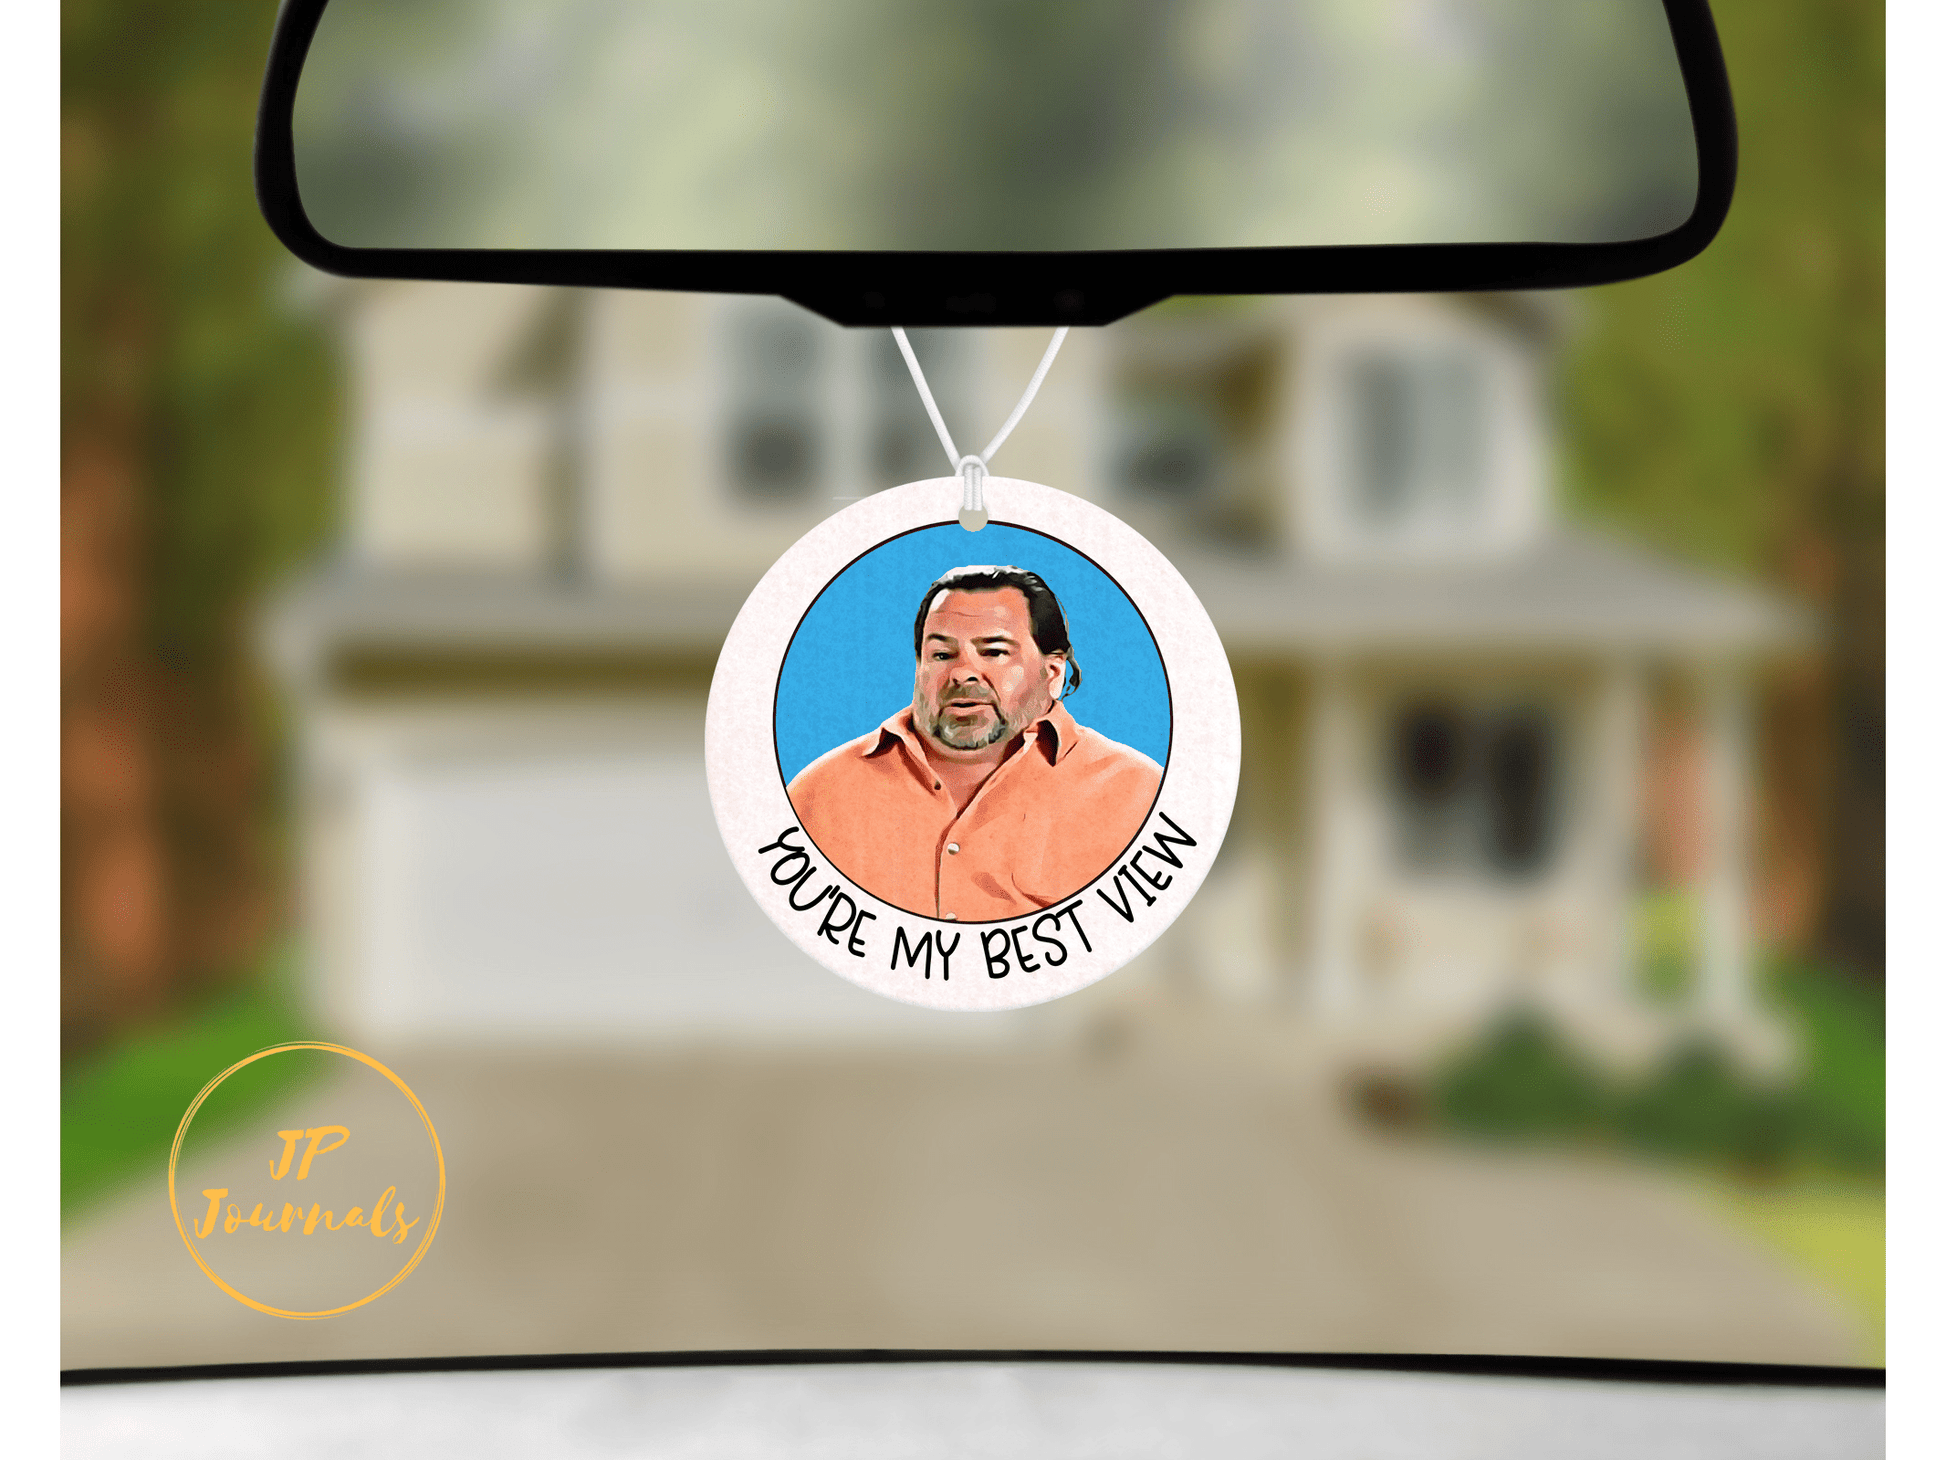 90 Day Fiance Fan Gift Air Freshener, Ed You're My Best View, Funny 90 Day Fiancé Gift